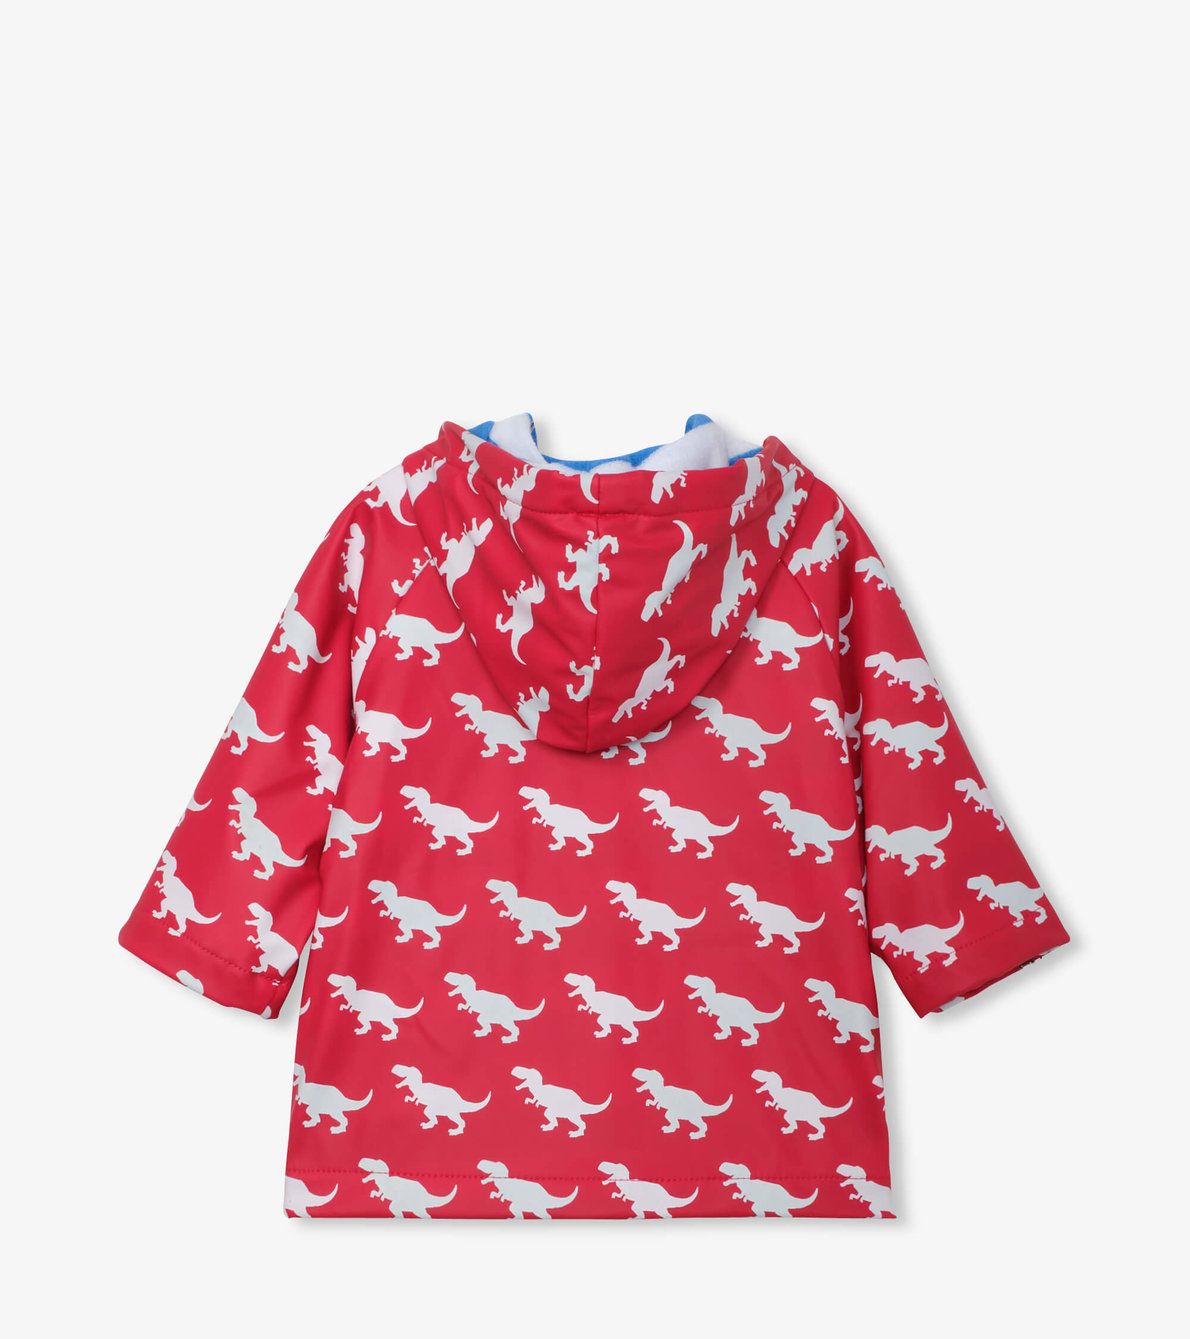 View larger image of T-Rex Silhouettes Colour Changing Baby Raincoat